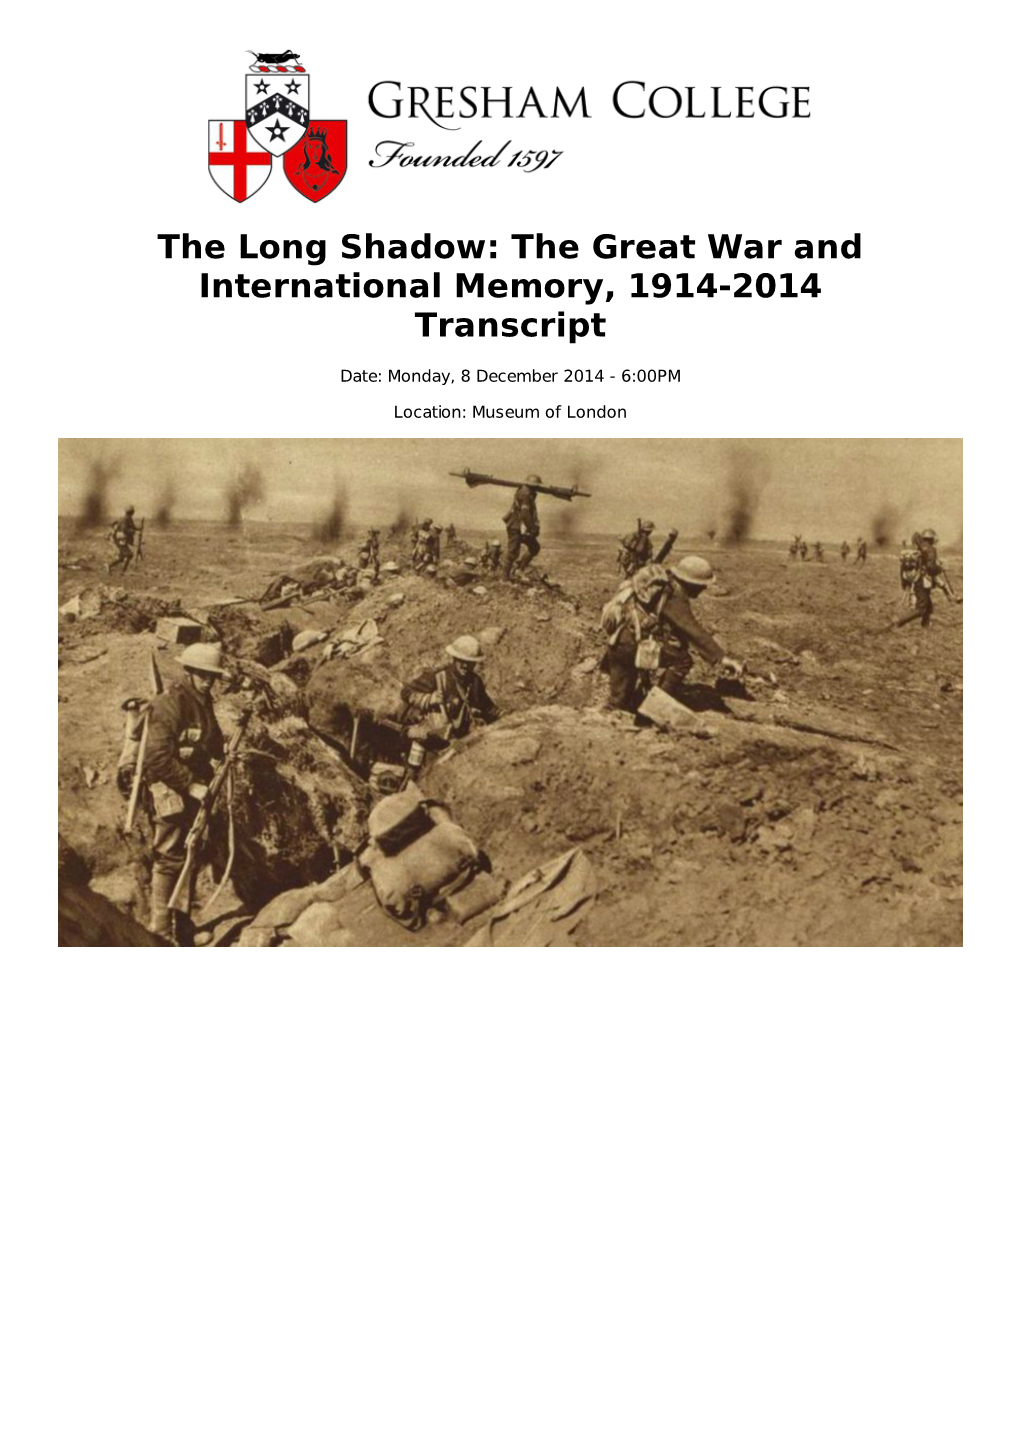 The Long Shadow: the Great War and International Memory, 1914-2014 Transcript